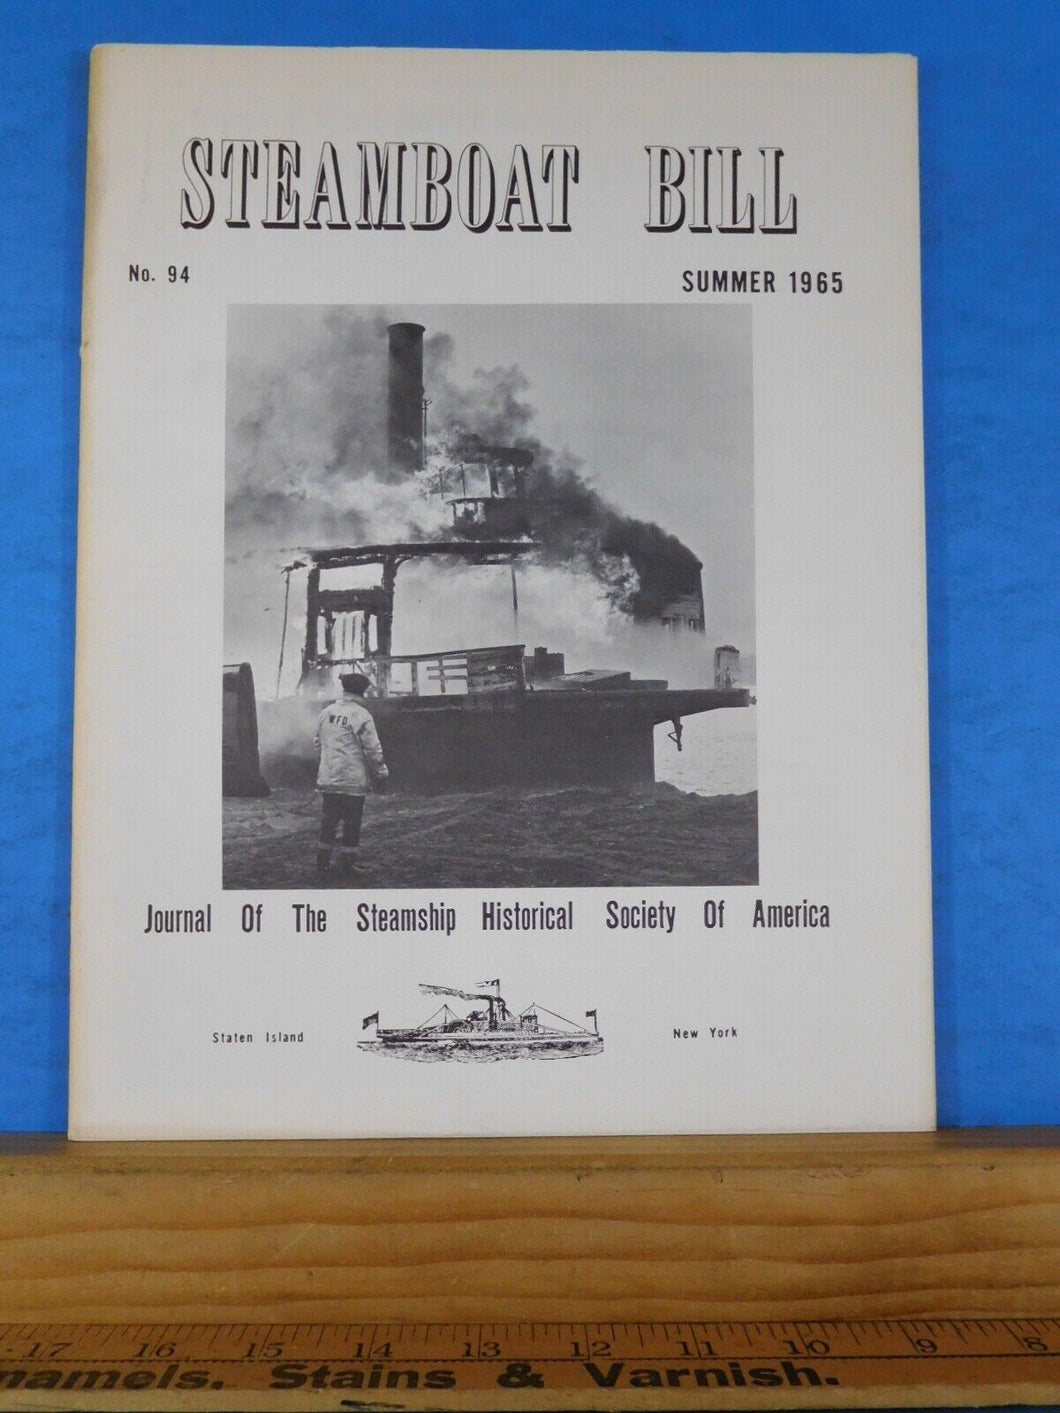 Steamboat Bill #94 Summer 1965 Journal of the Steamship Historical Society